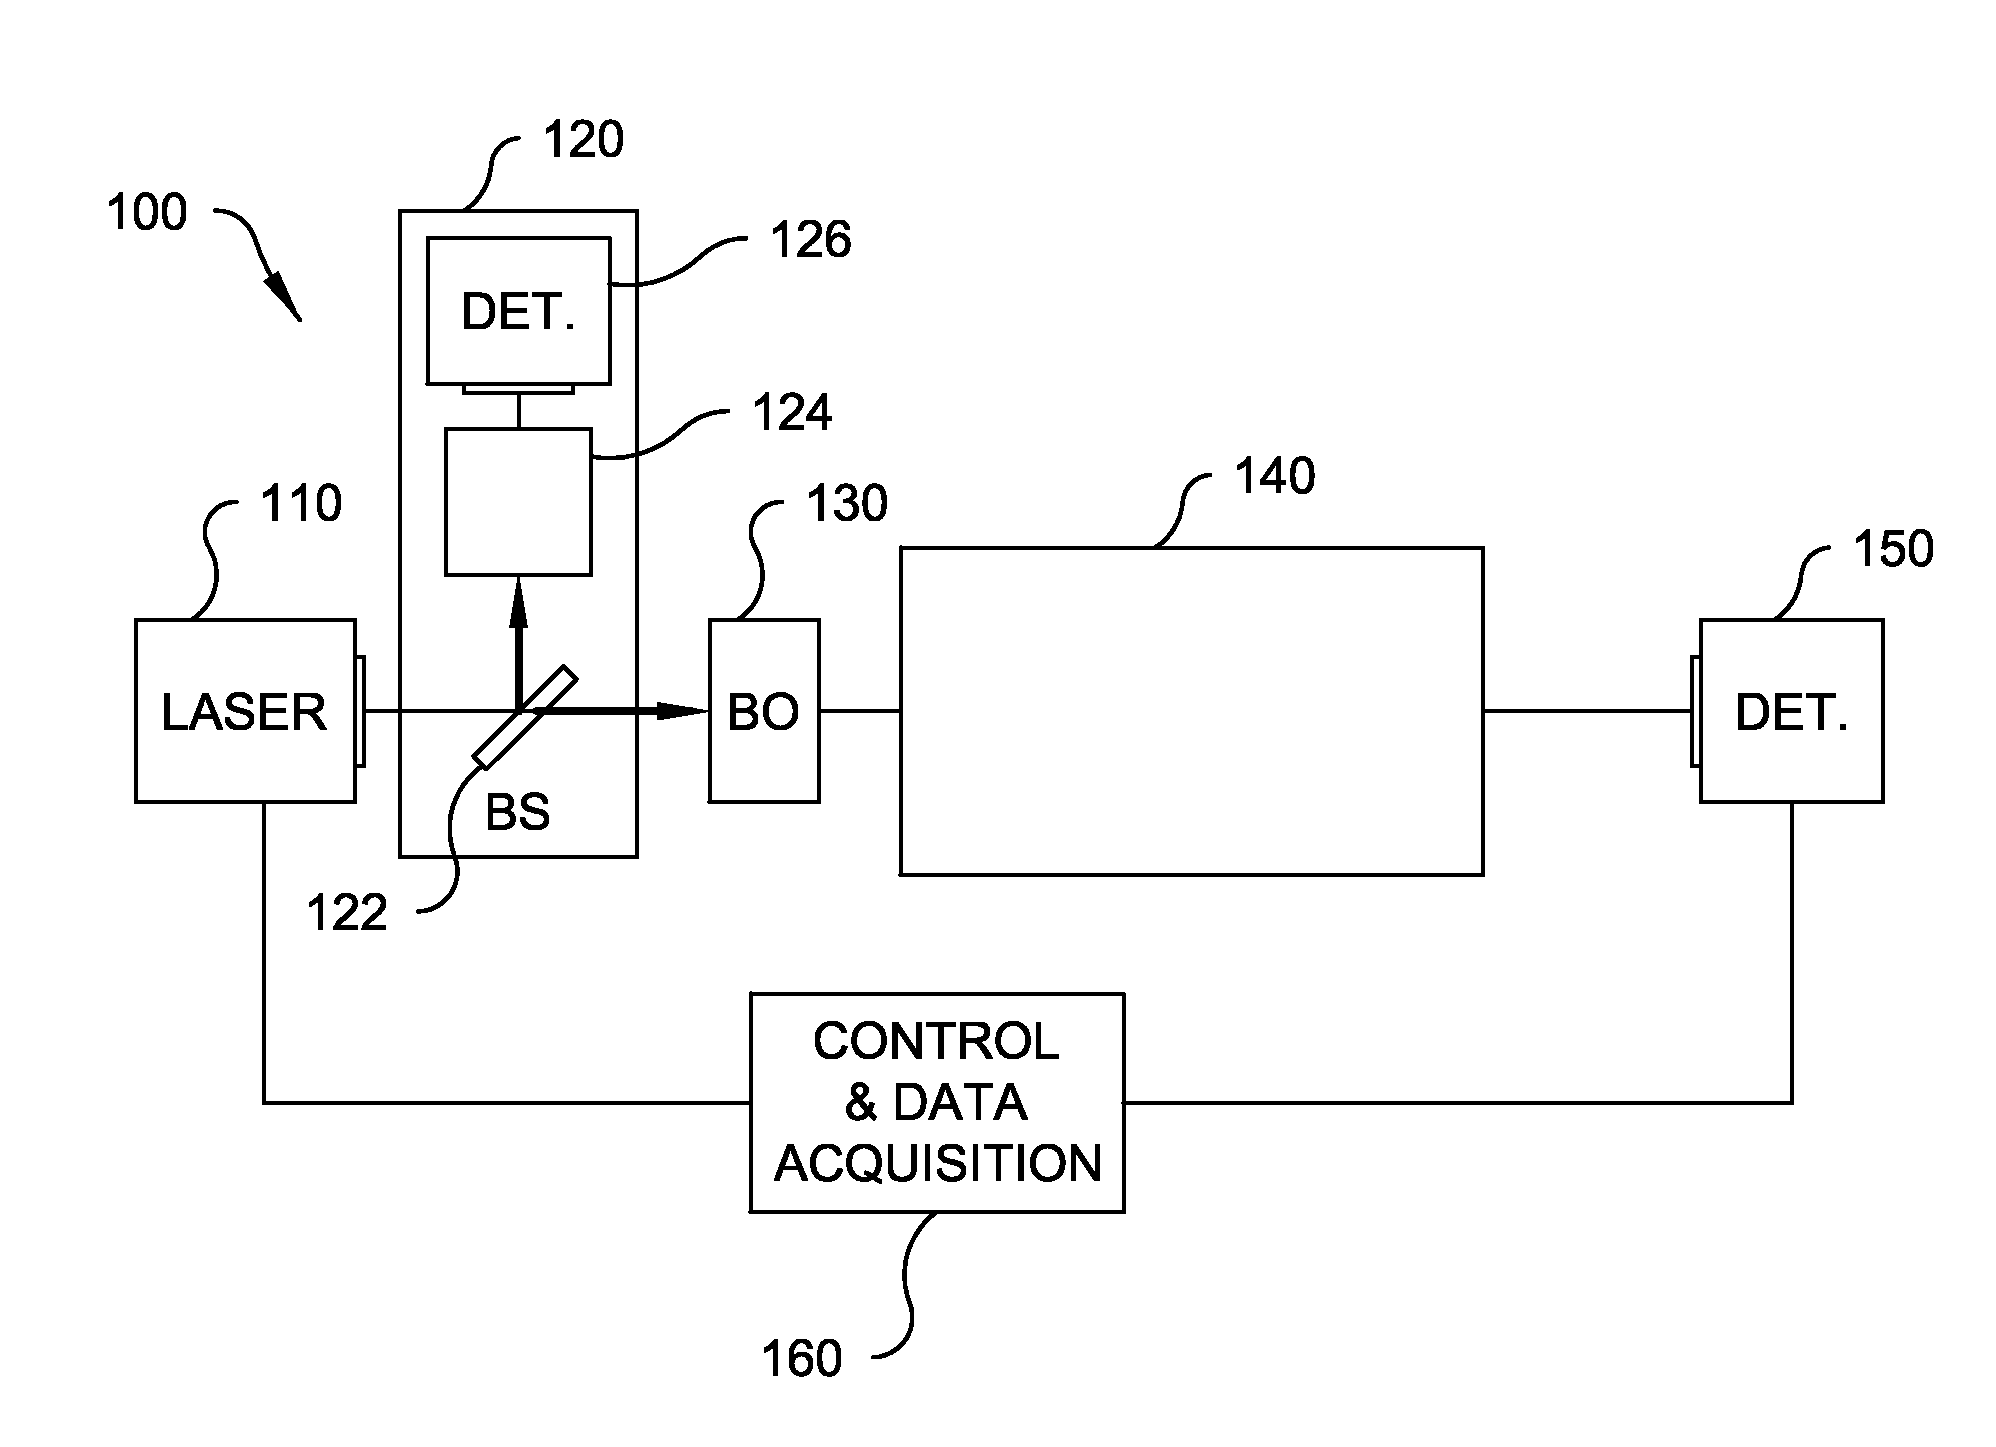 Method and Apparatus for Measuring Trace Levels of CO in Human Breath Using Cavity Enhanced, Mid-Infared Absorption Spectroscopy